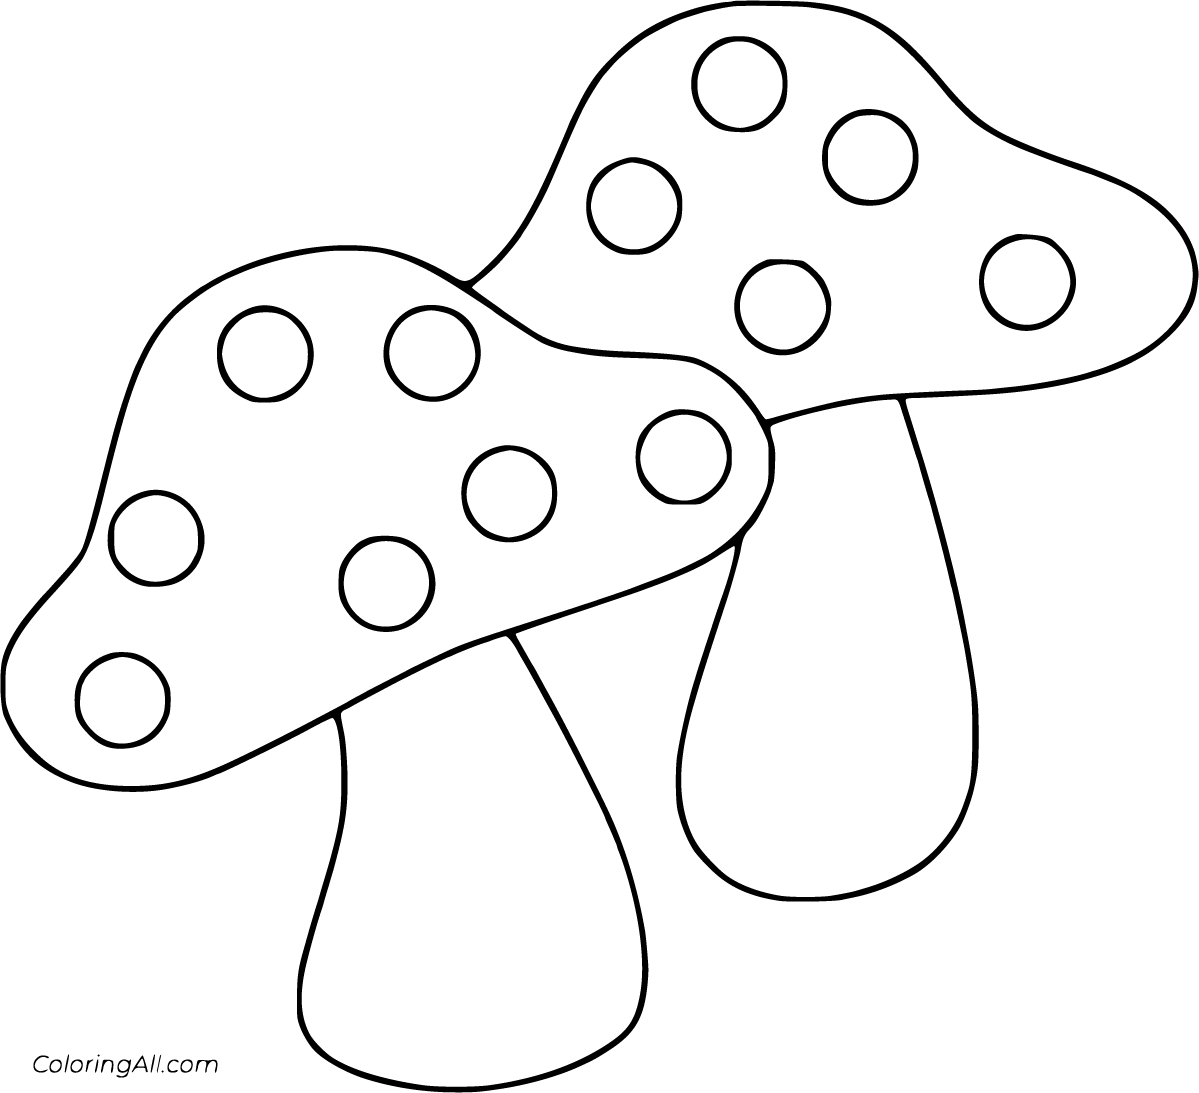 Simple Mushroom Coloring Pages Coloring Pages